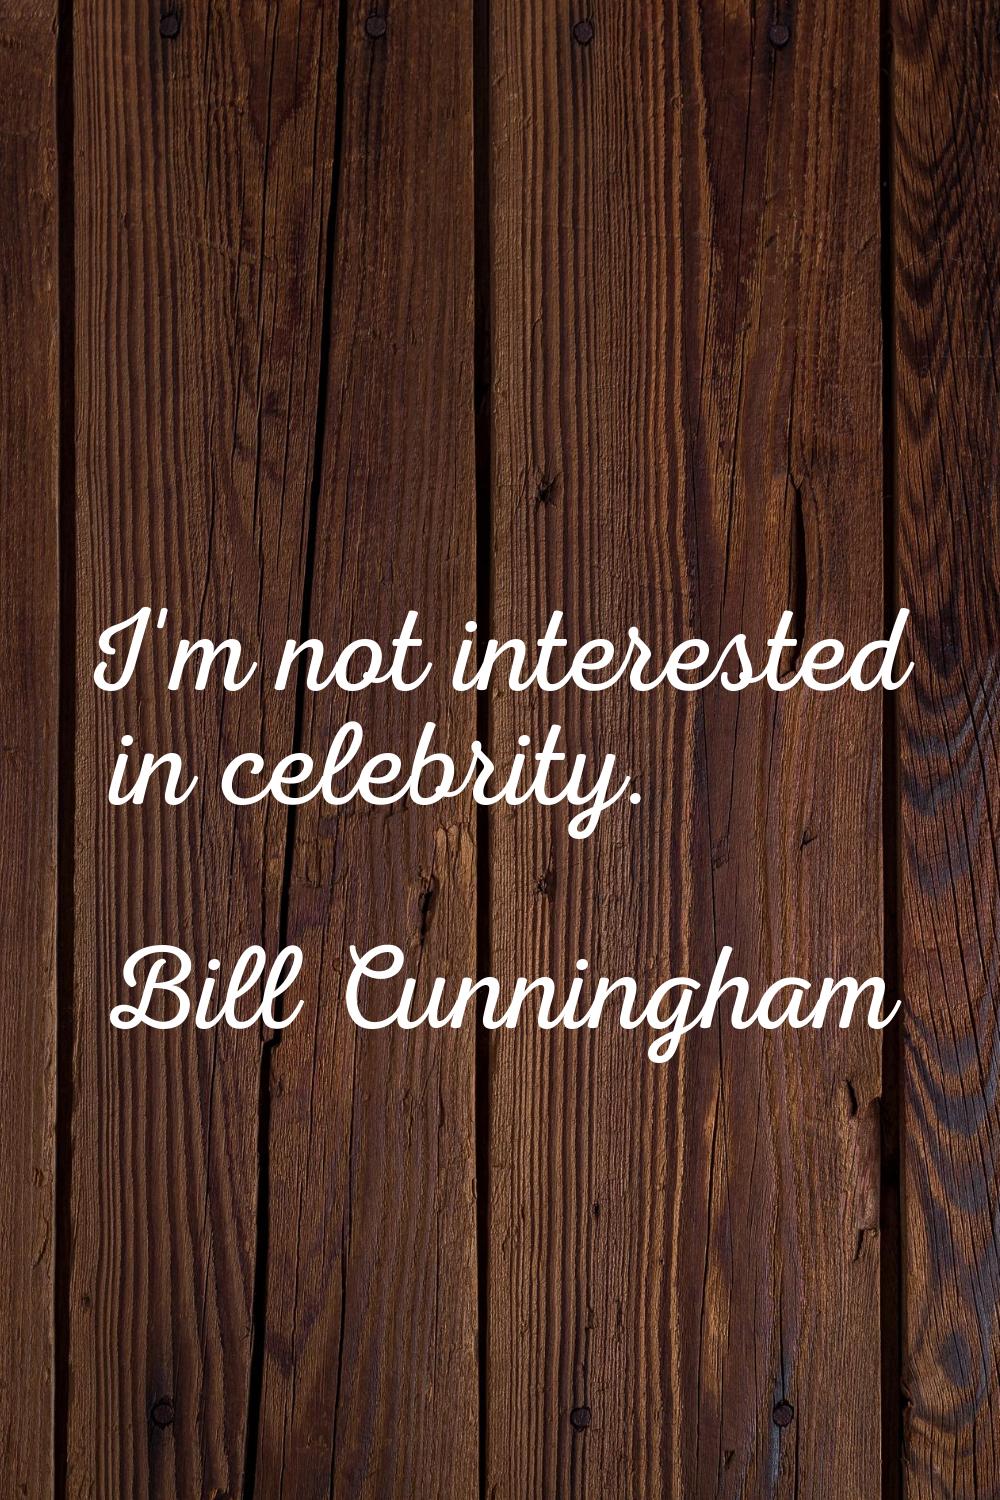 I'm not interested in celebrity.